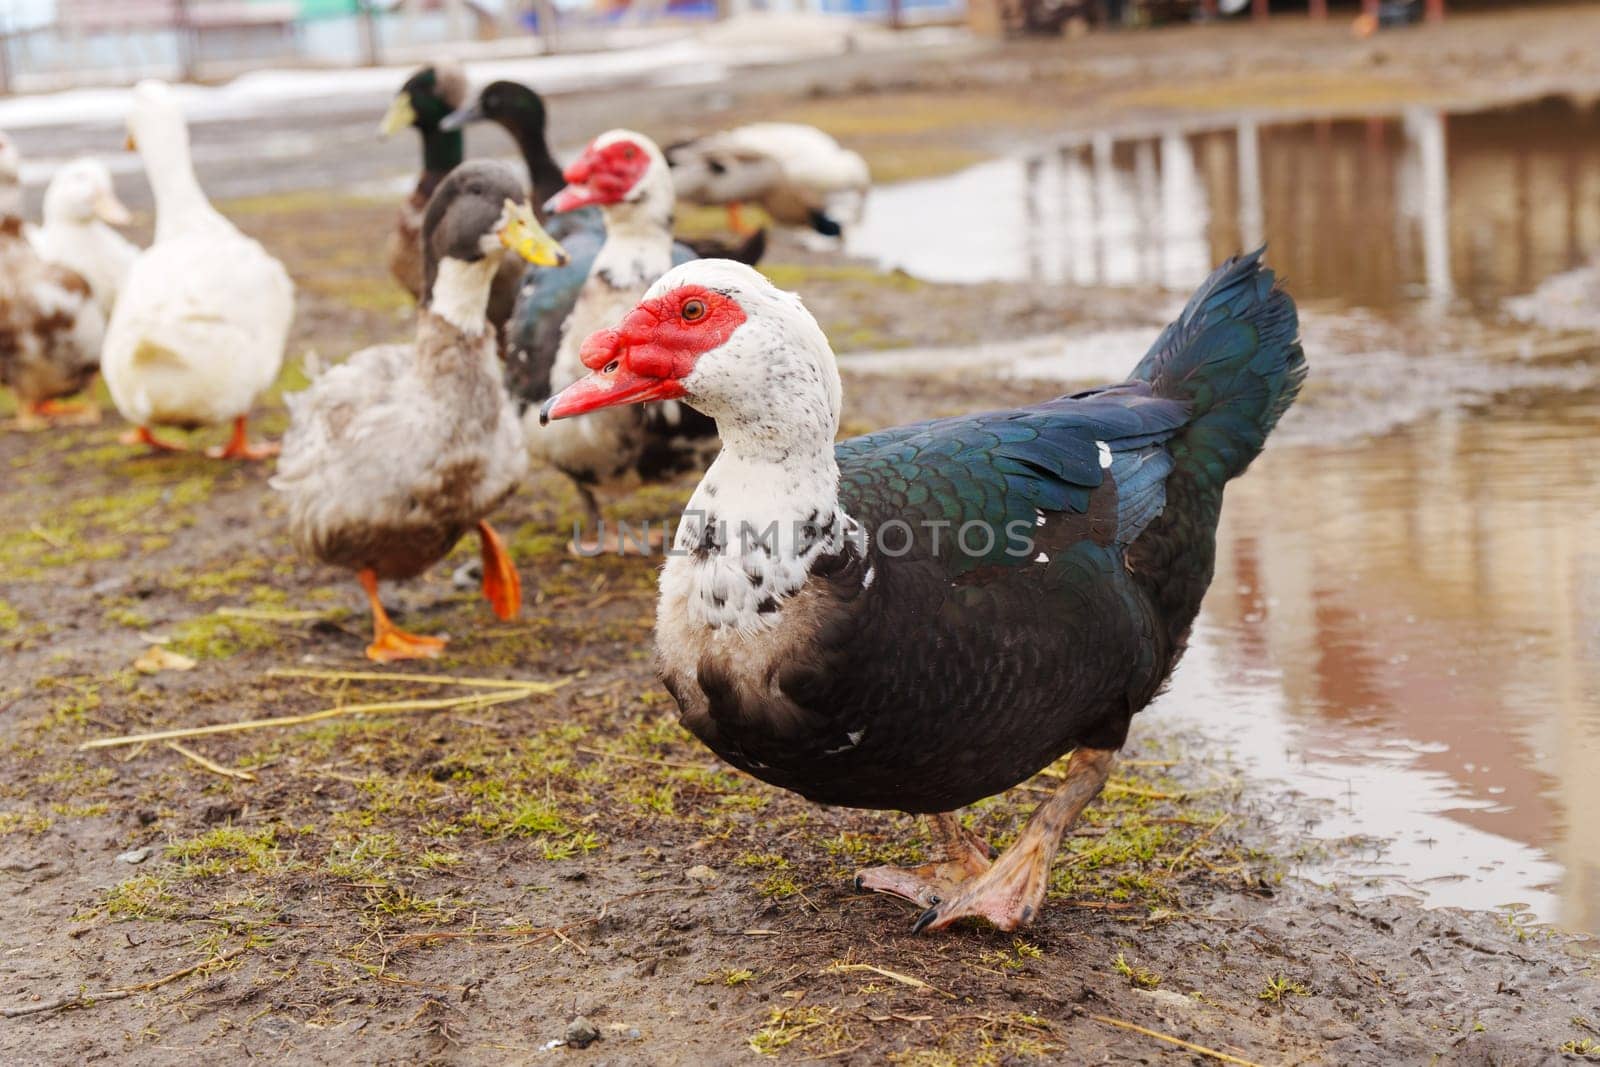 Muscovy duck with black and white feathers gracefully stands, showcasing its vibrant red beak in a farm setting. by darksoul72